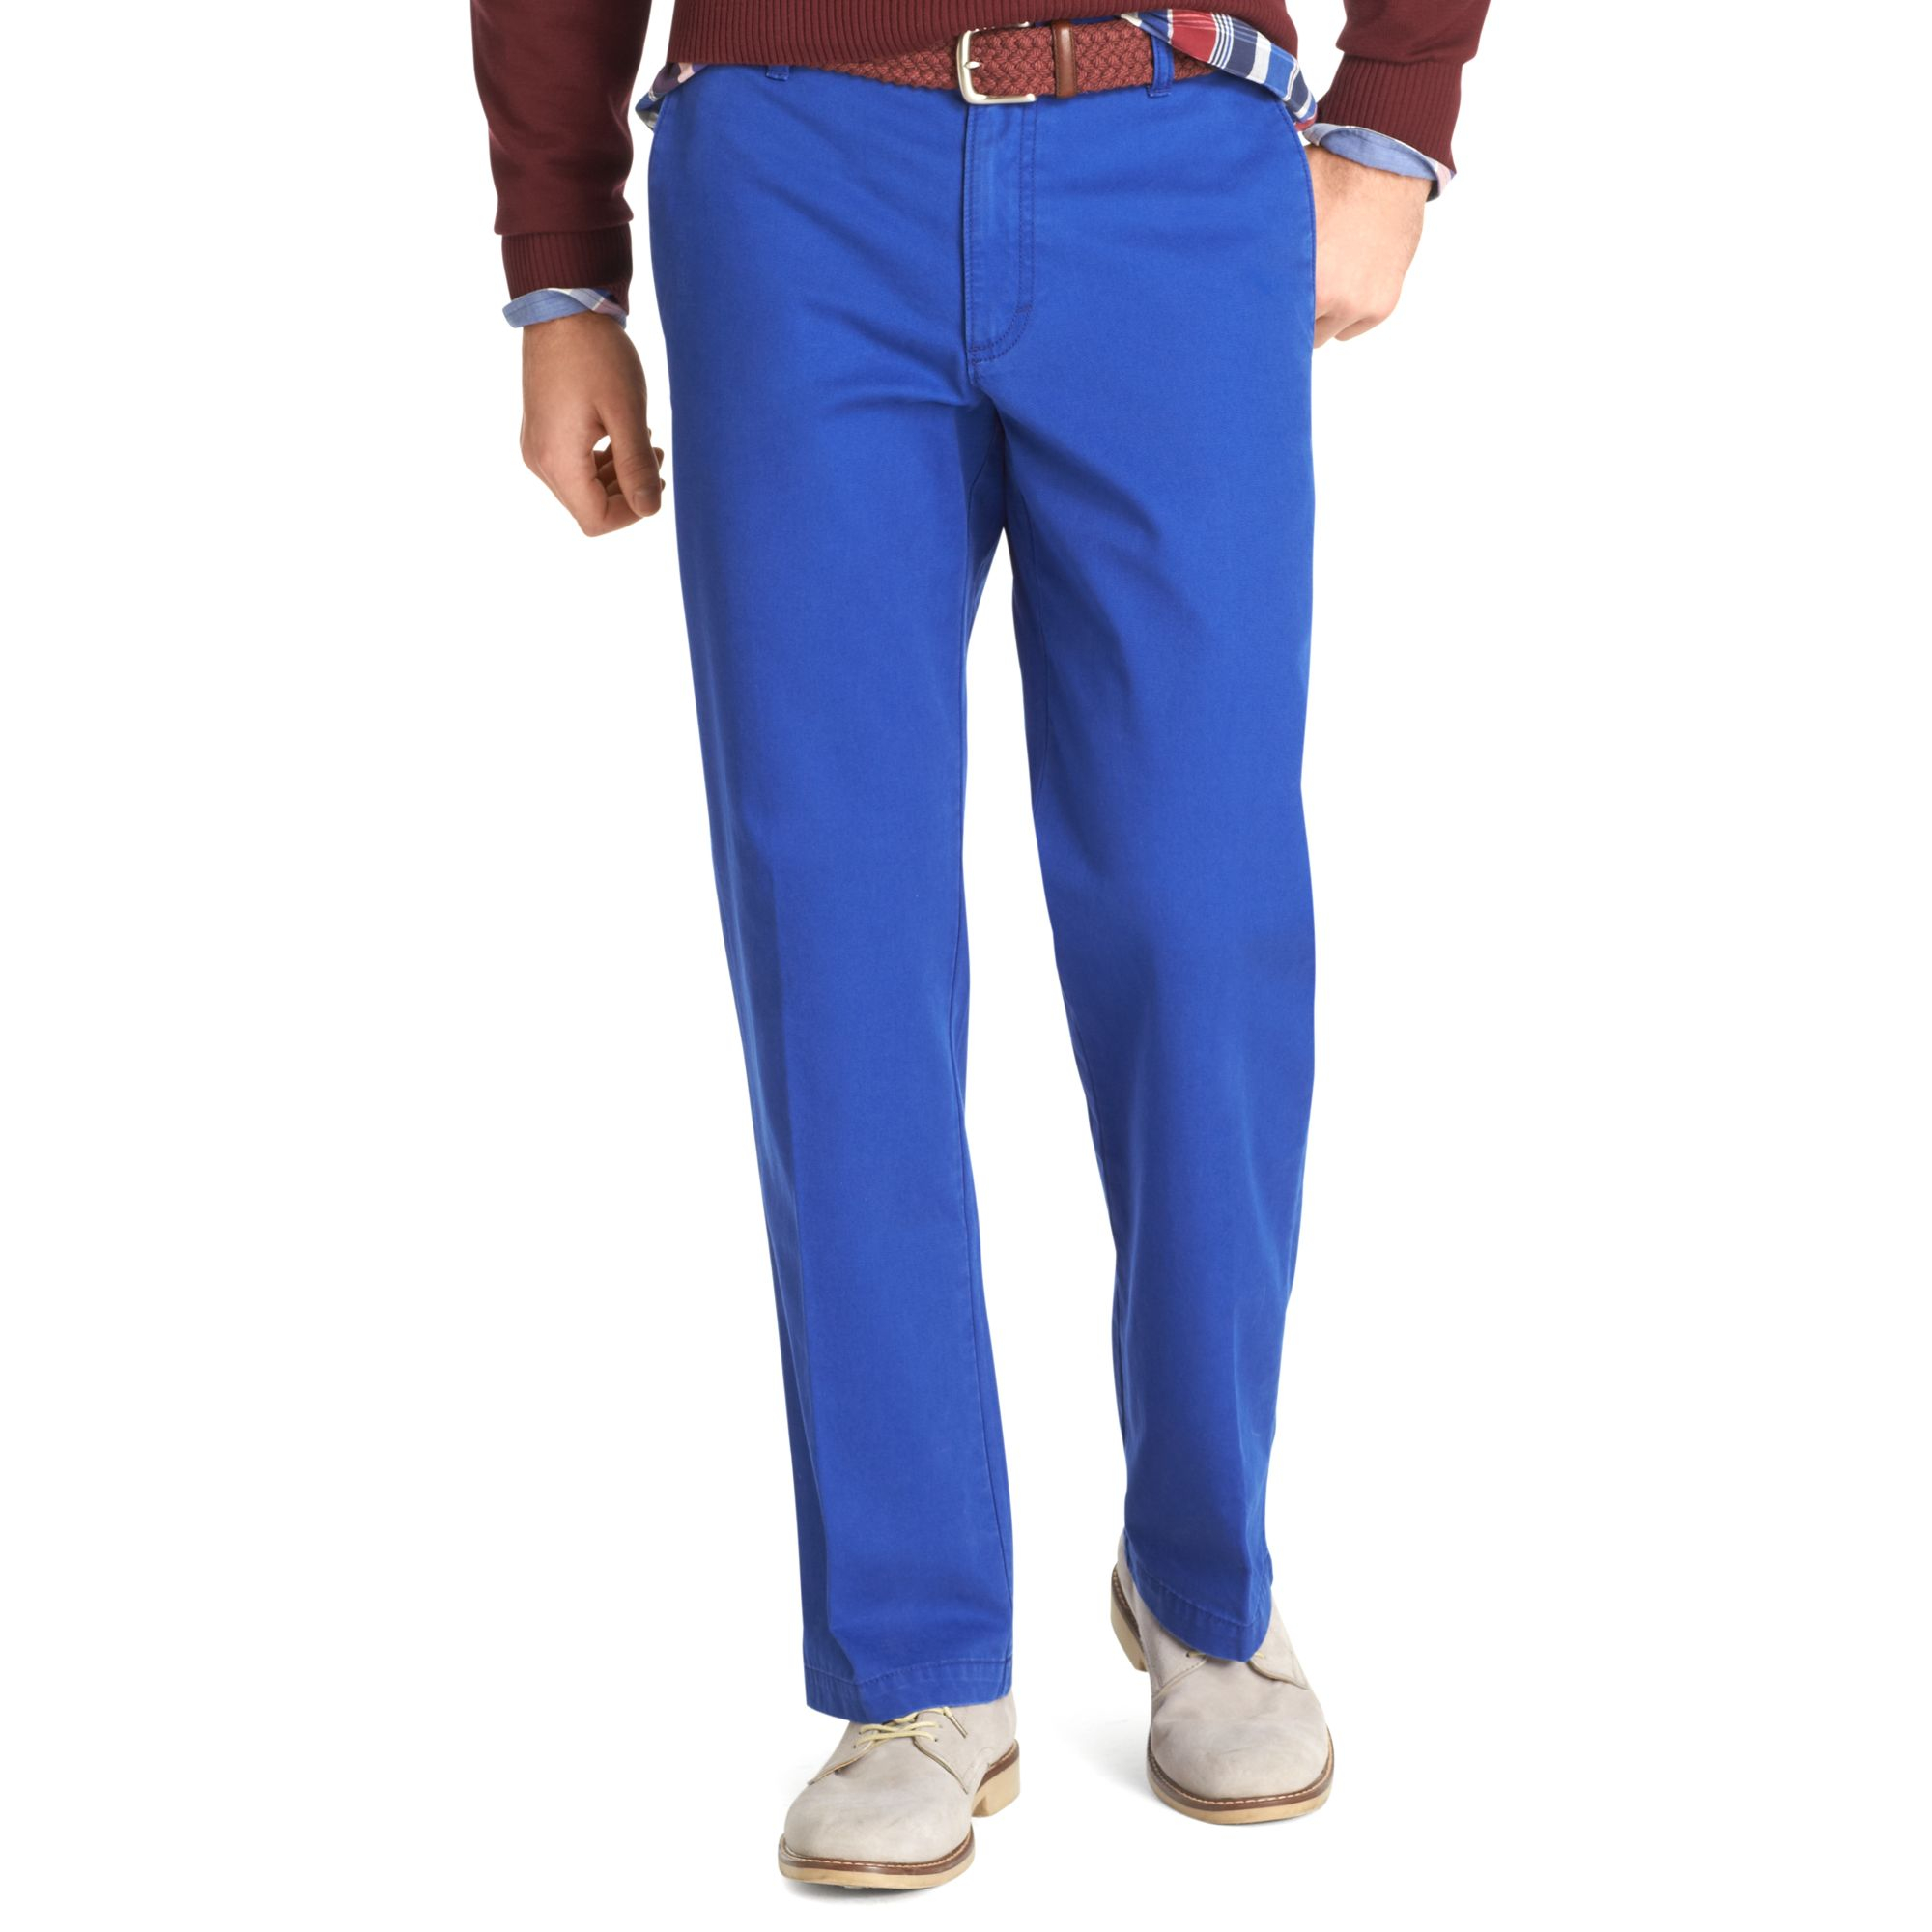 Lyst - Izod Saltwater Straightfit Chino Pants in Blue for Men